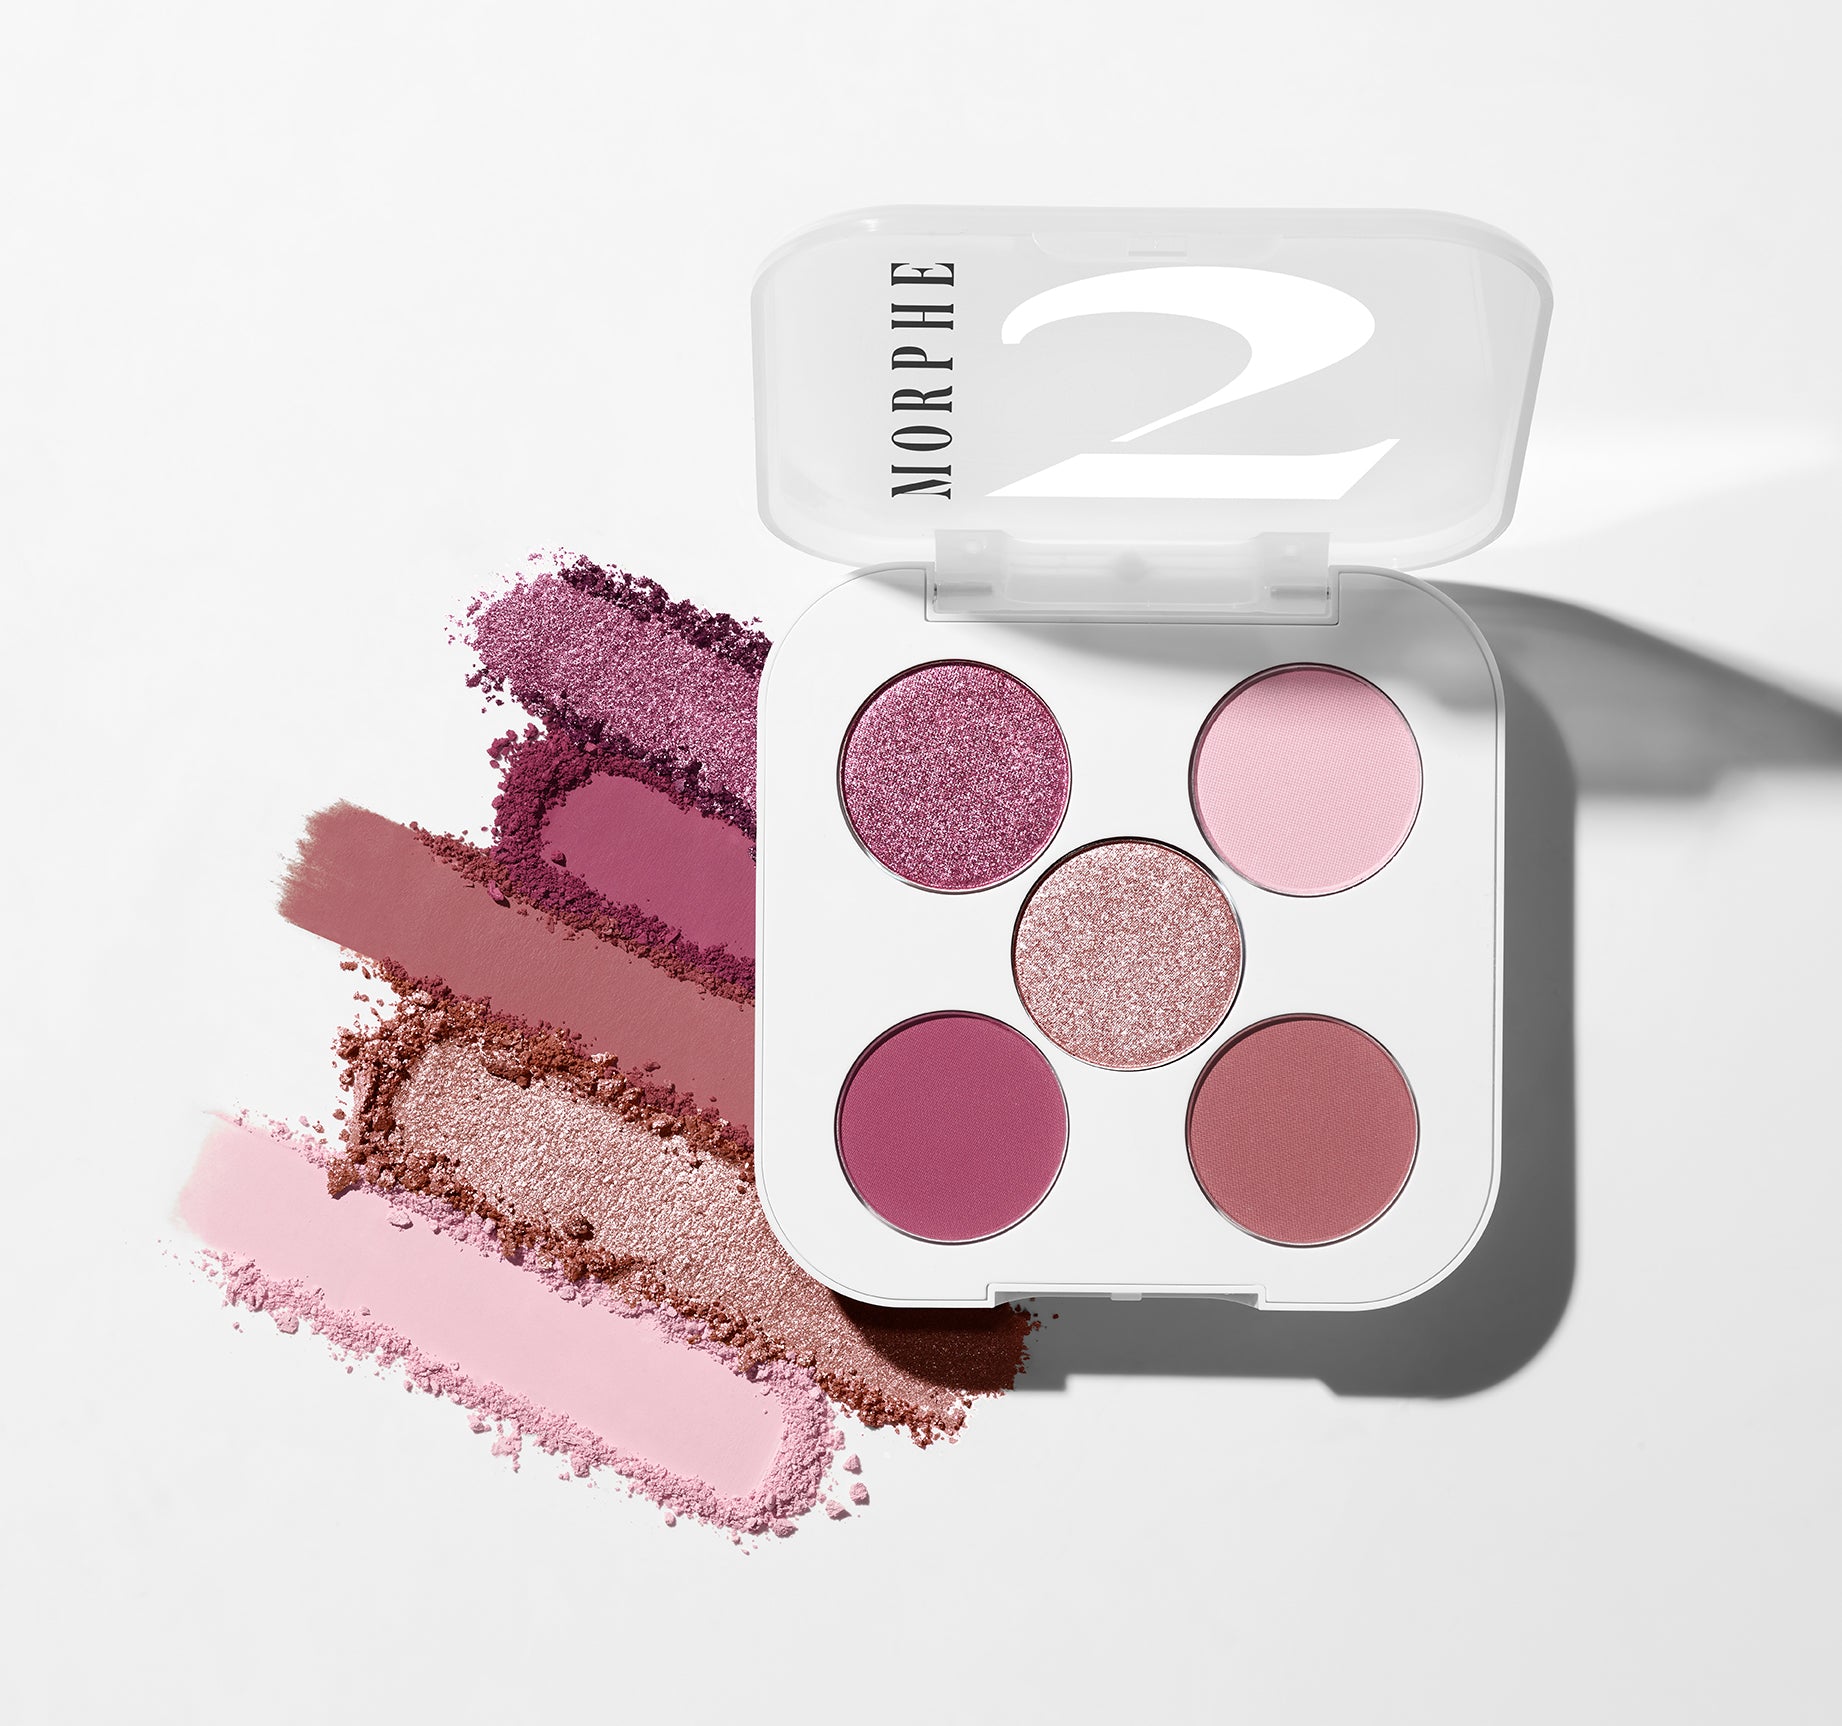 Ready In 5 Eyeshadow Palette - From Hawaii With Love - Image 4